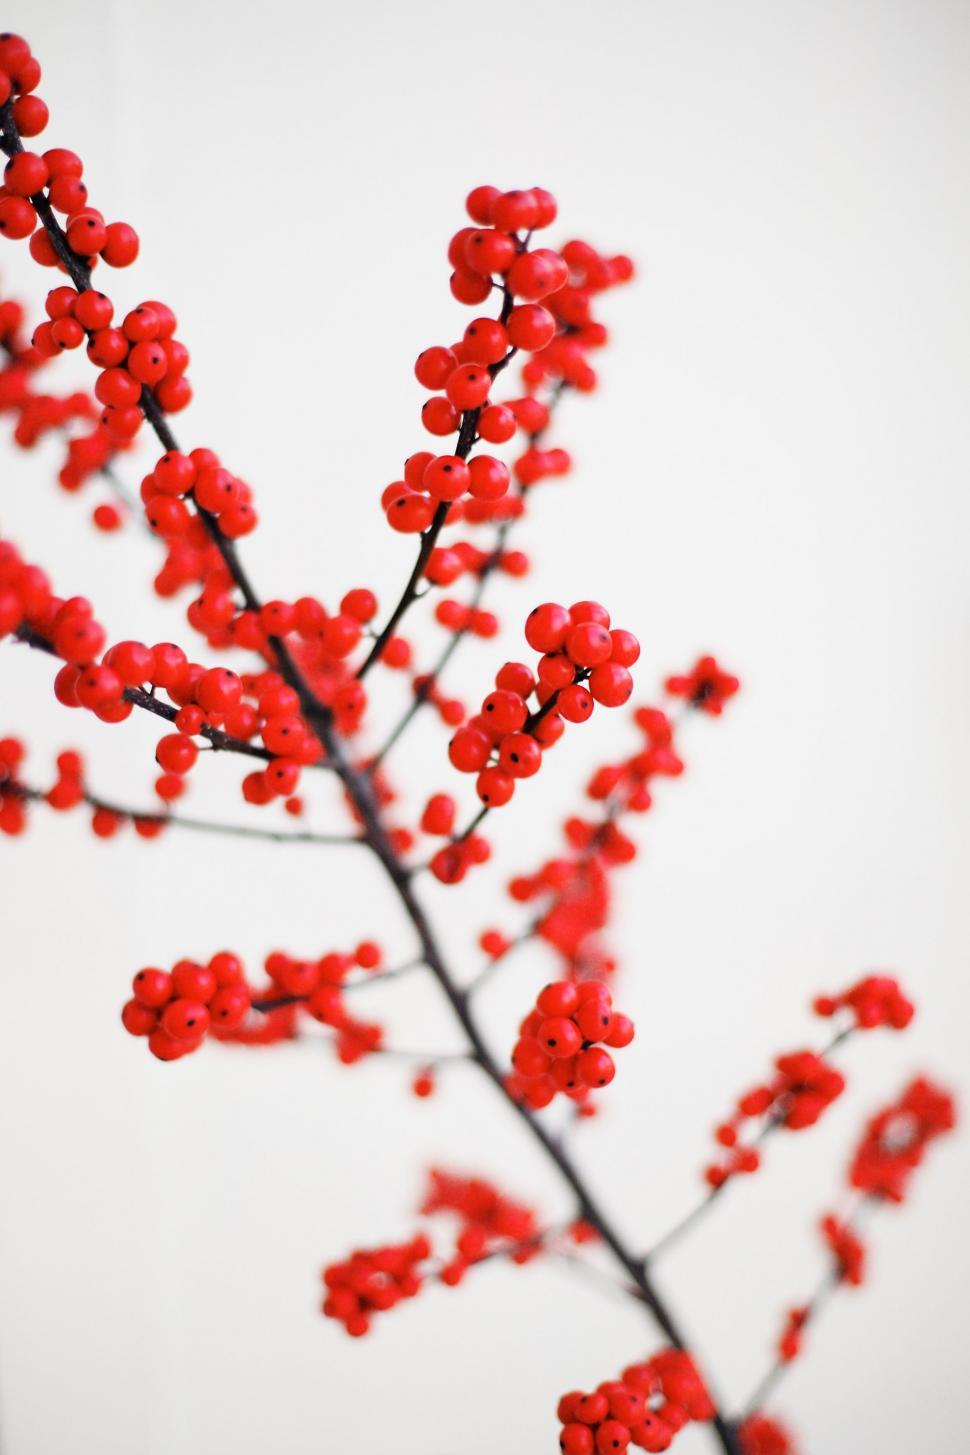 Free Image of Branch With Red Berries on White Background 